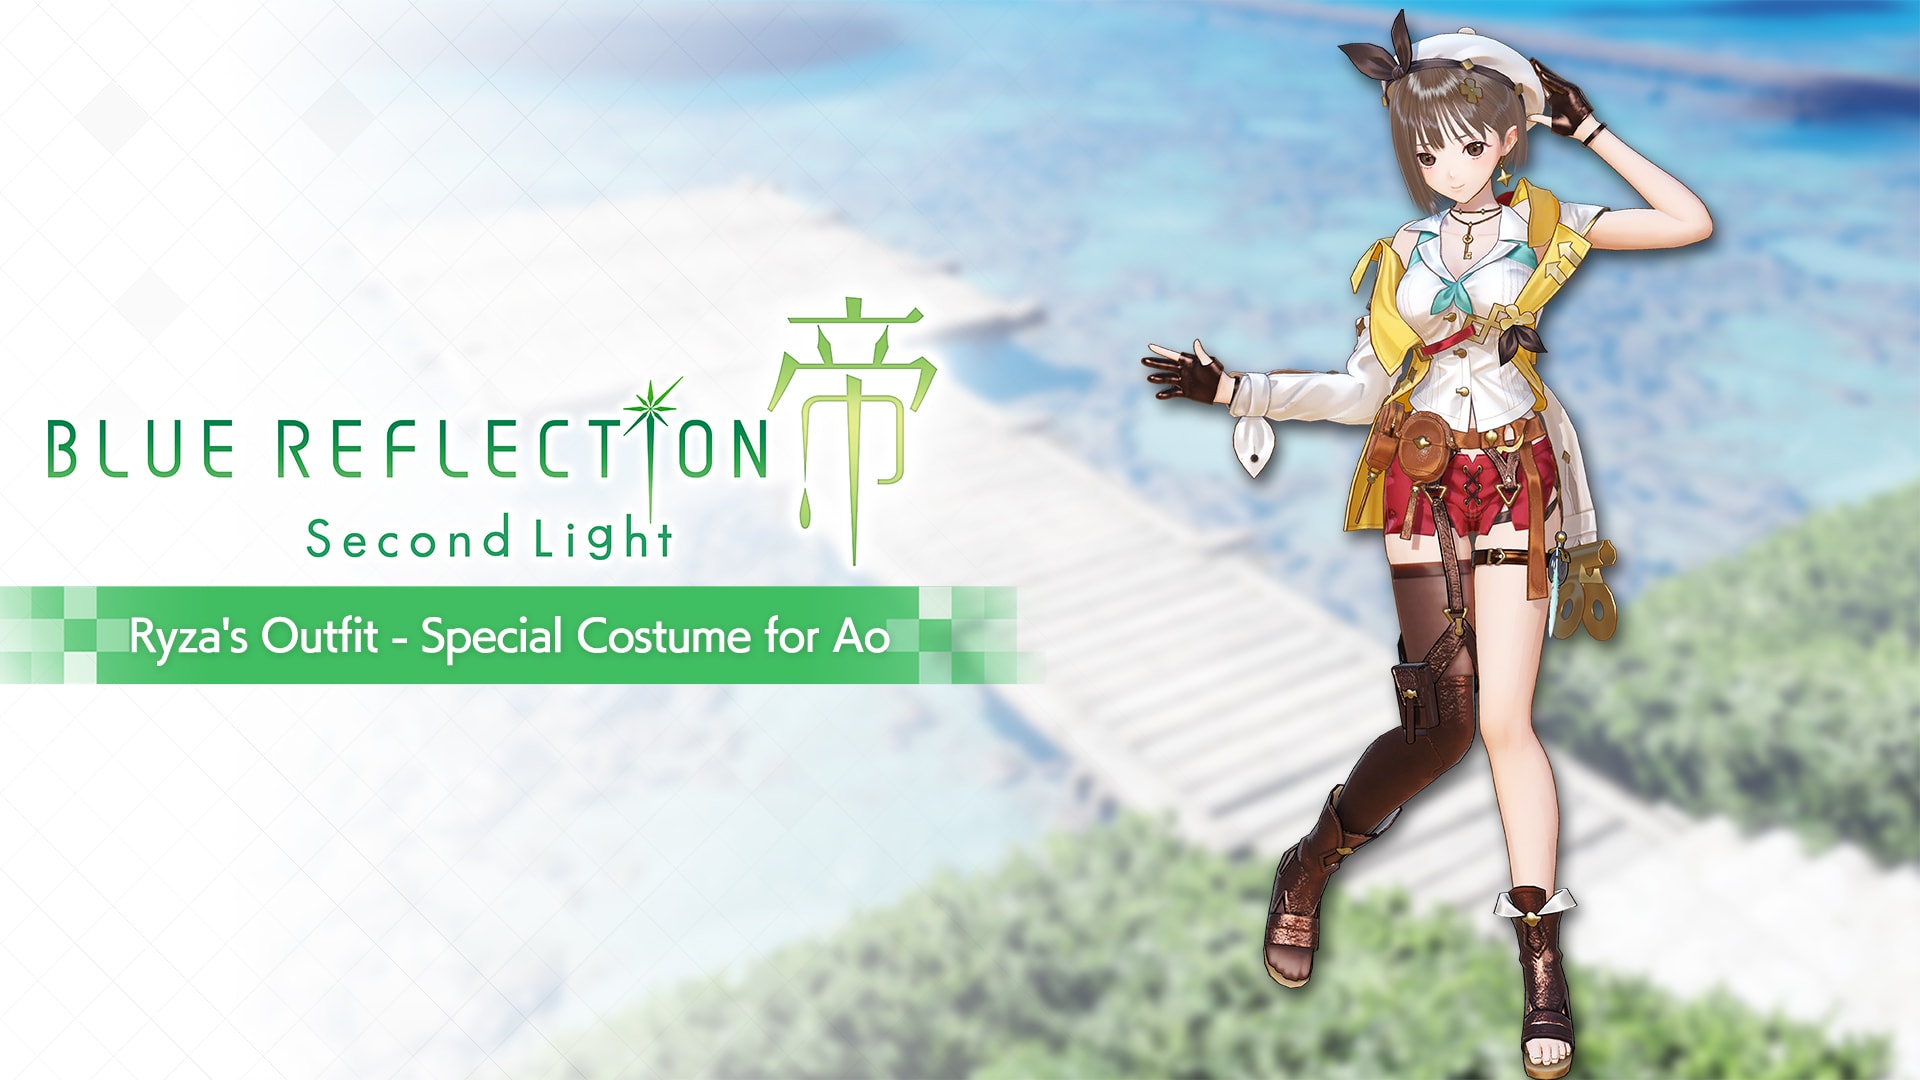 Ryza's Outfit - Special Costume for Ao 1